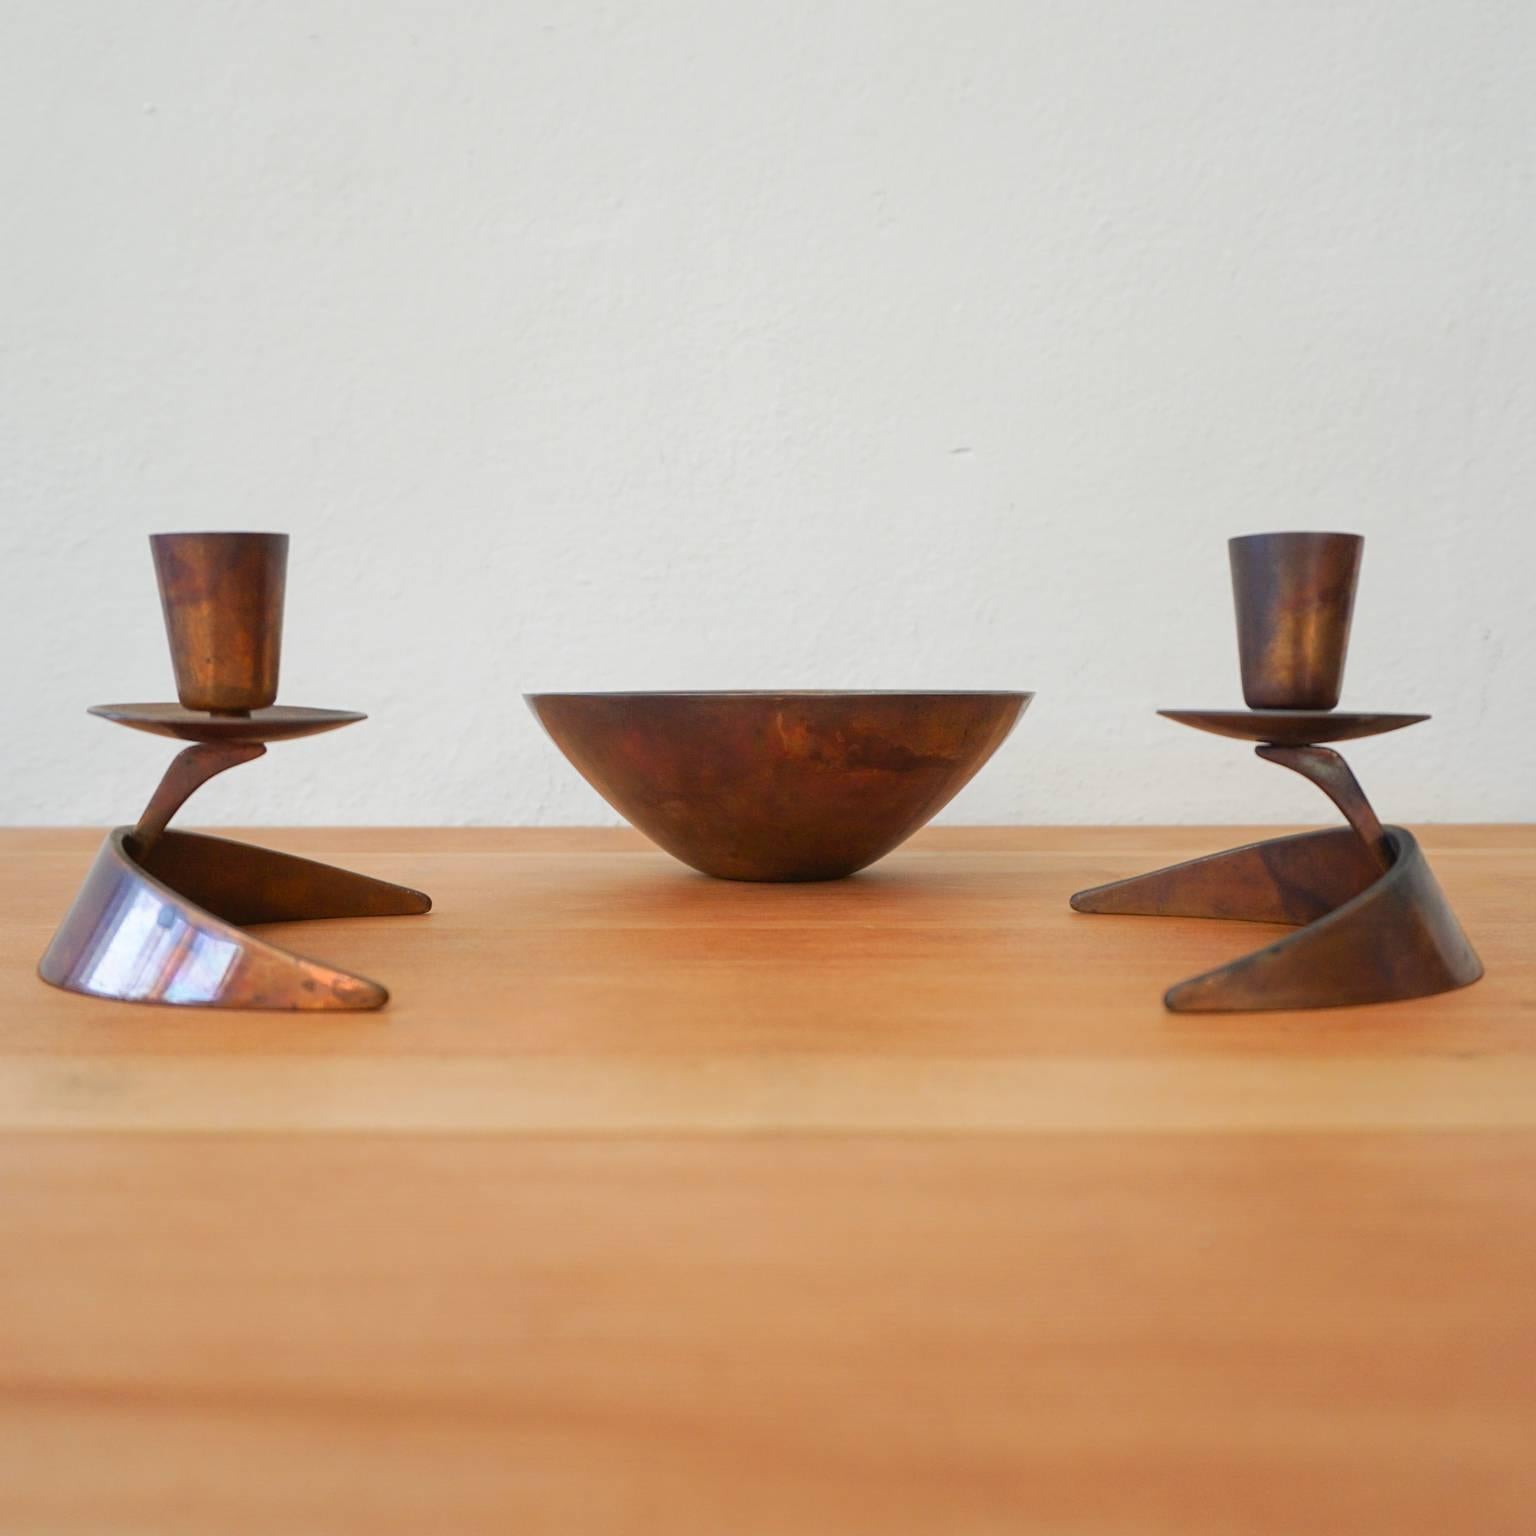 Solid bronze bowl and candlesticks by Ronald Pearson for Metal Arts Co. Rochester, NY. Signed with a stamp.

Measures: Bowl 5.75 D x 2